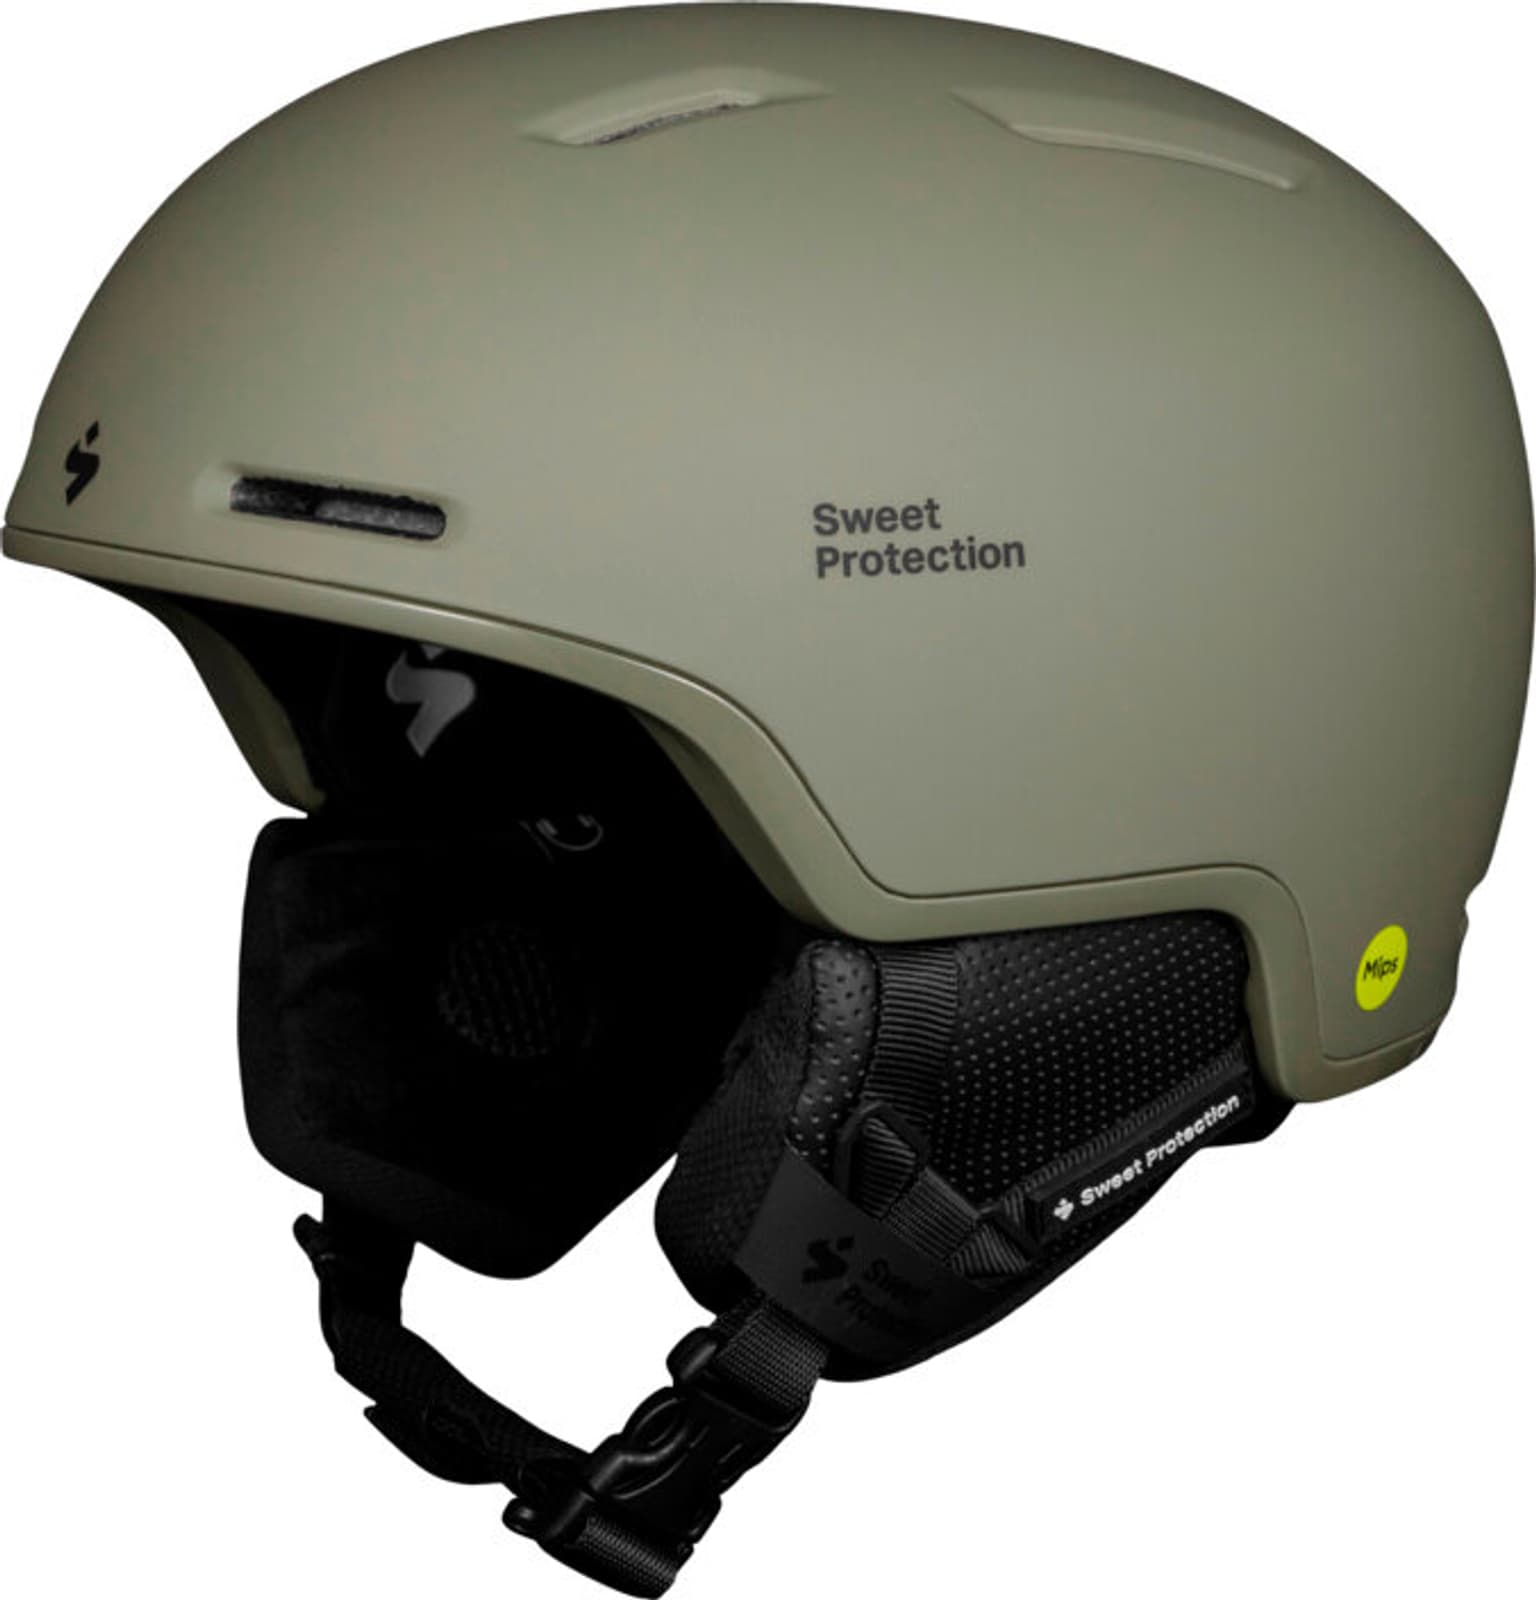 Sweet Protection Sweet Protection Looper Mips Casque de ski olive 1